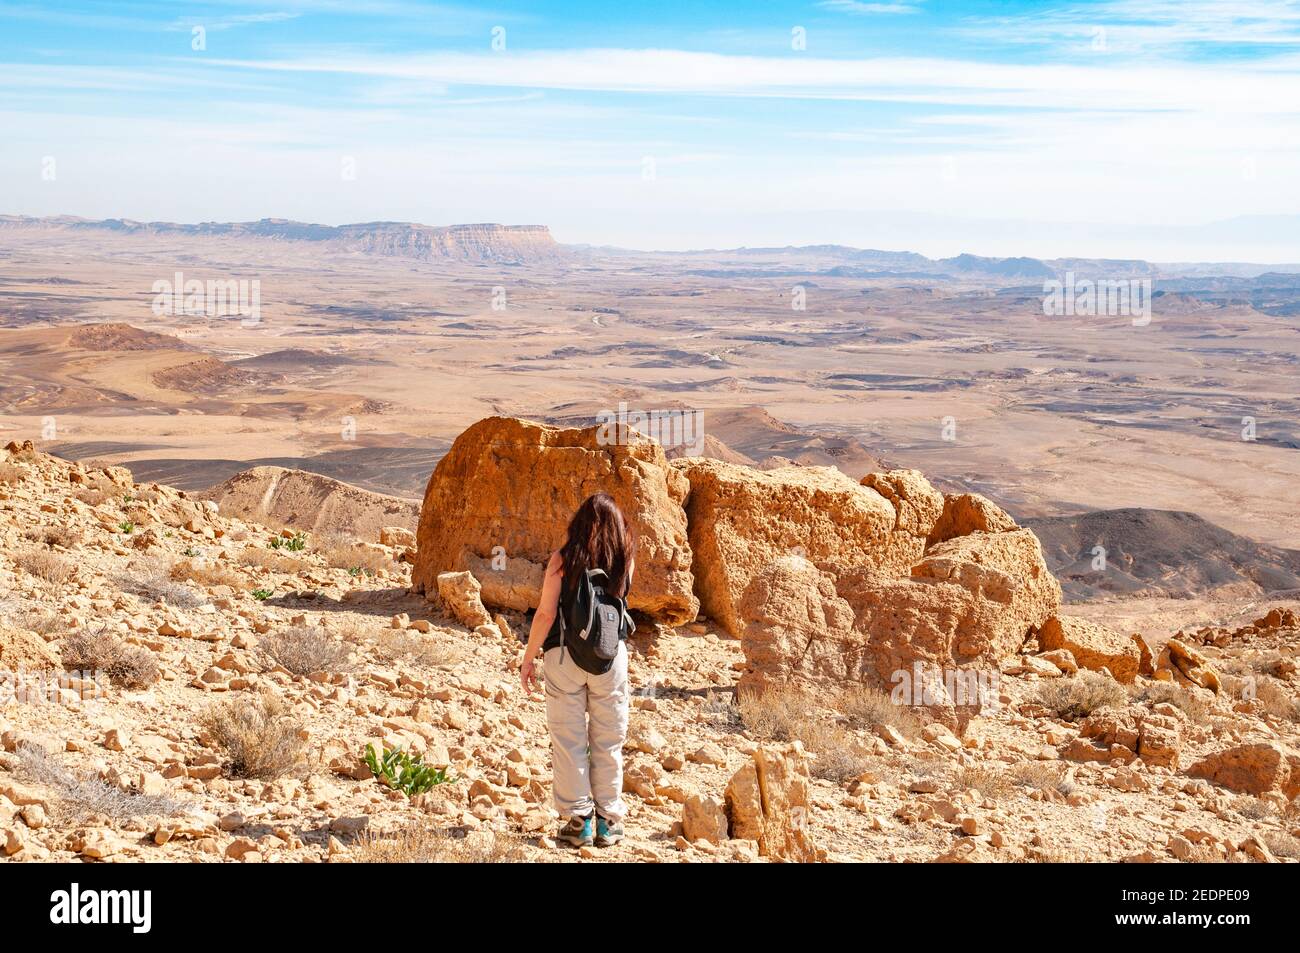 A group of hikers hiking in Makhtesh Ramon a geological feature of Israel's Negev desert. Located at the peak of Mount Negev, the world's largest 'ero Stock Photo